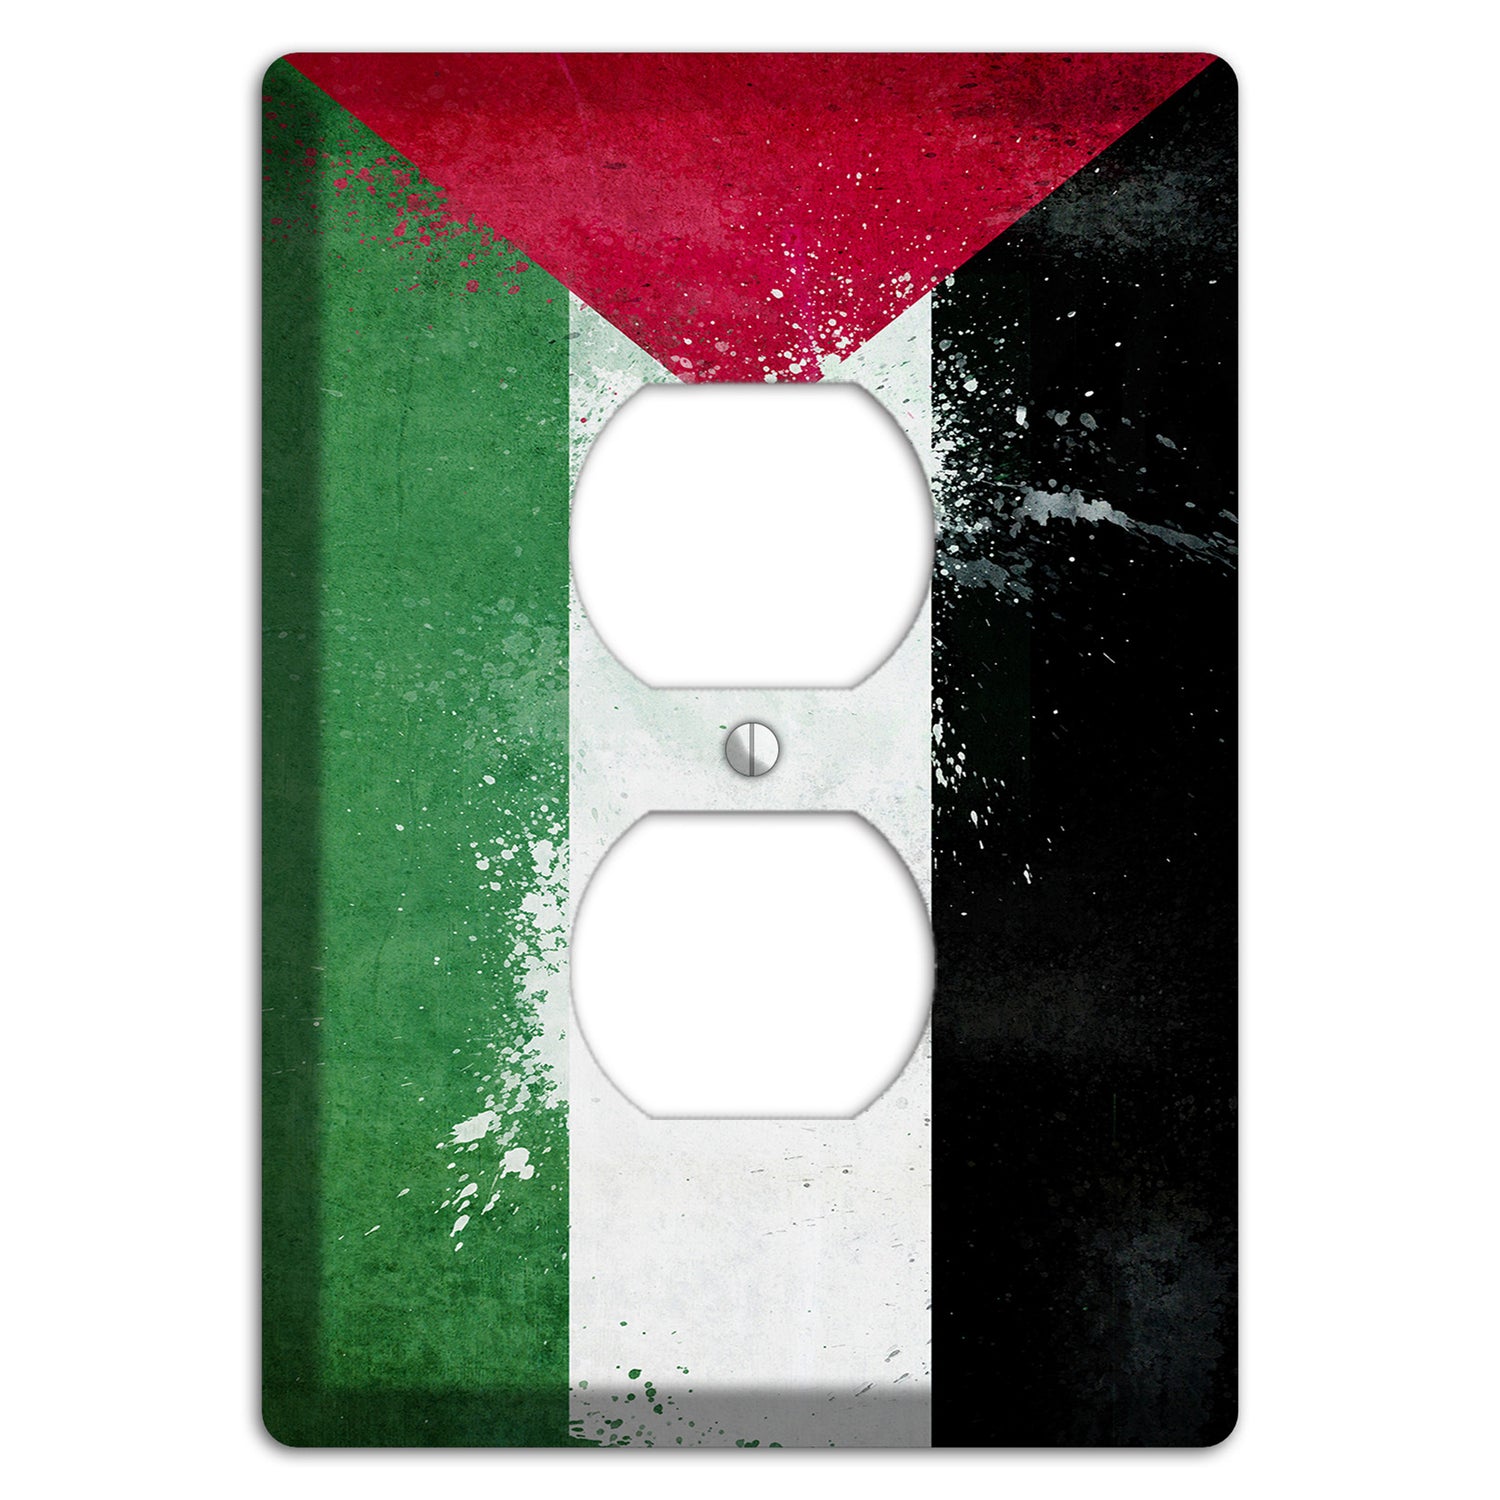 Palestine Cover Plates Duplex Outlet Wallplate